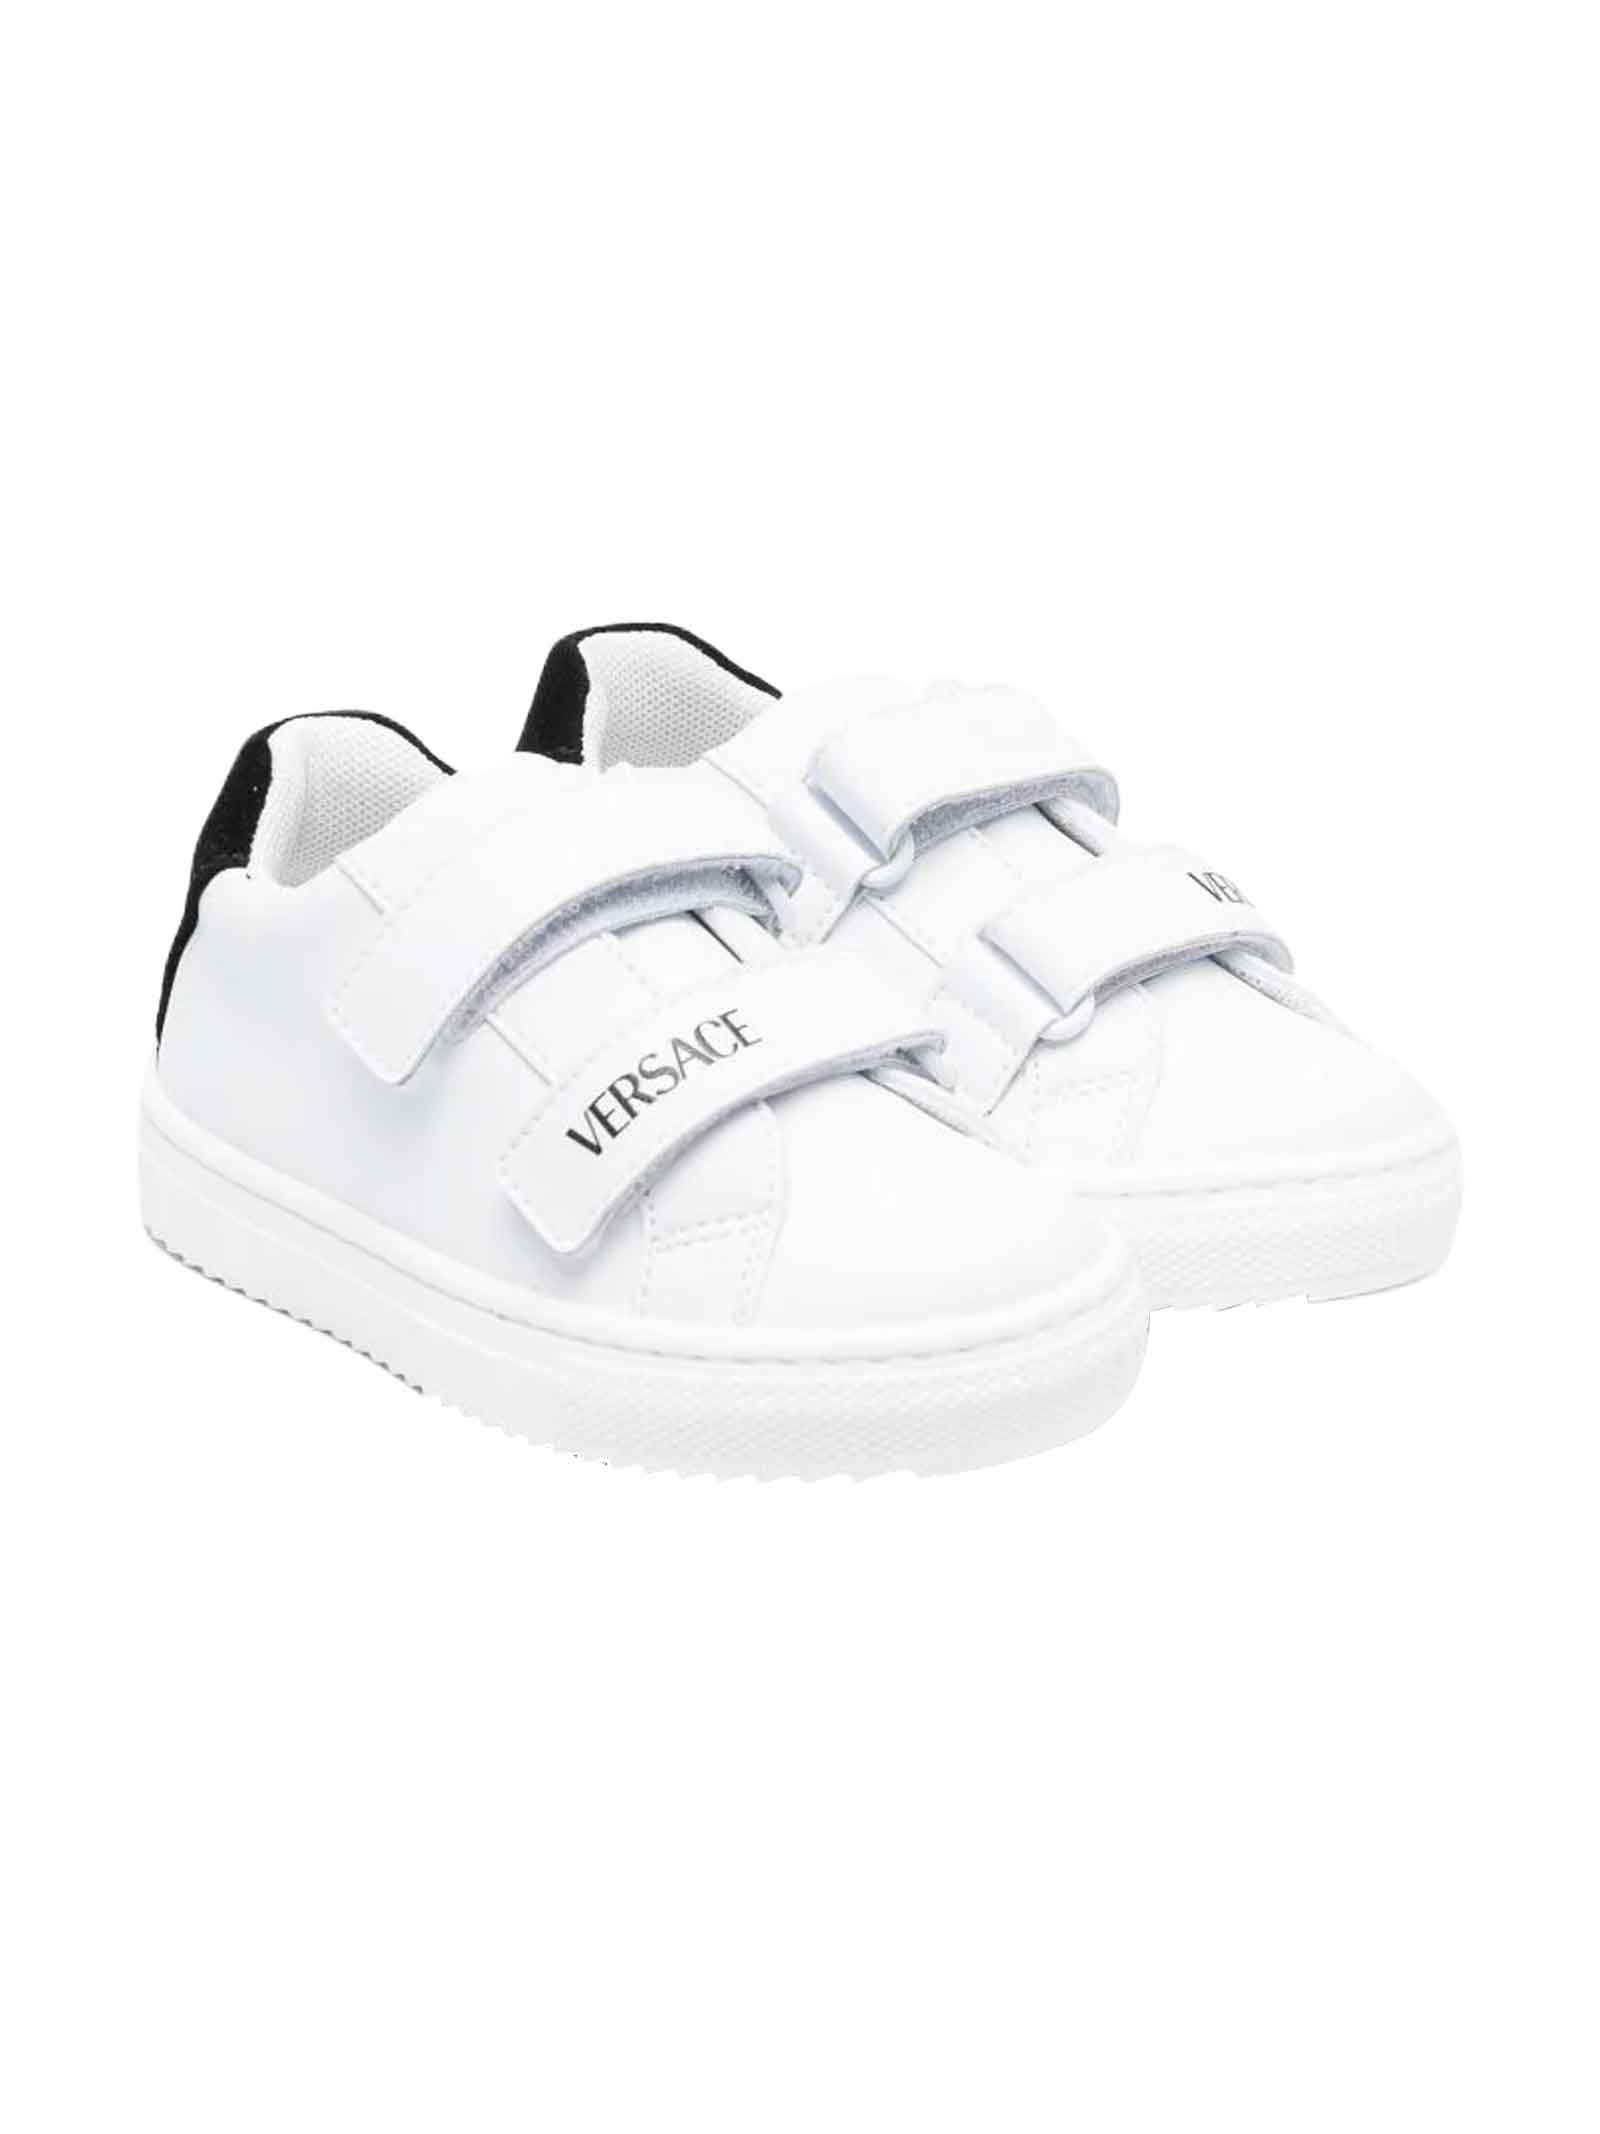 YOUNG VERSACE WHITE SNEAKERS BOY KIDS